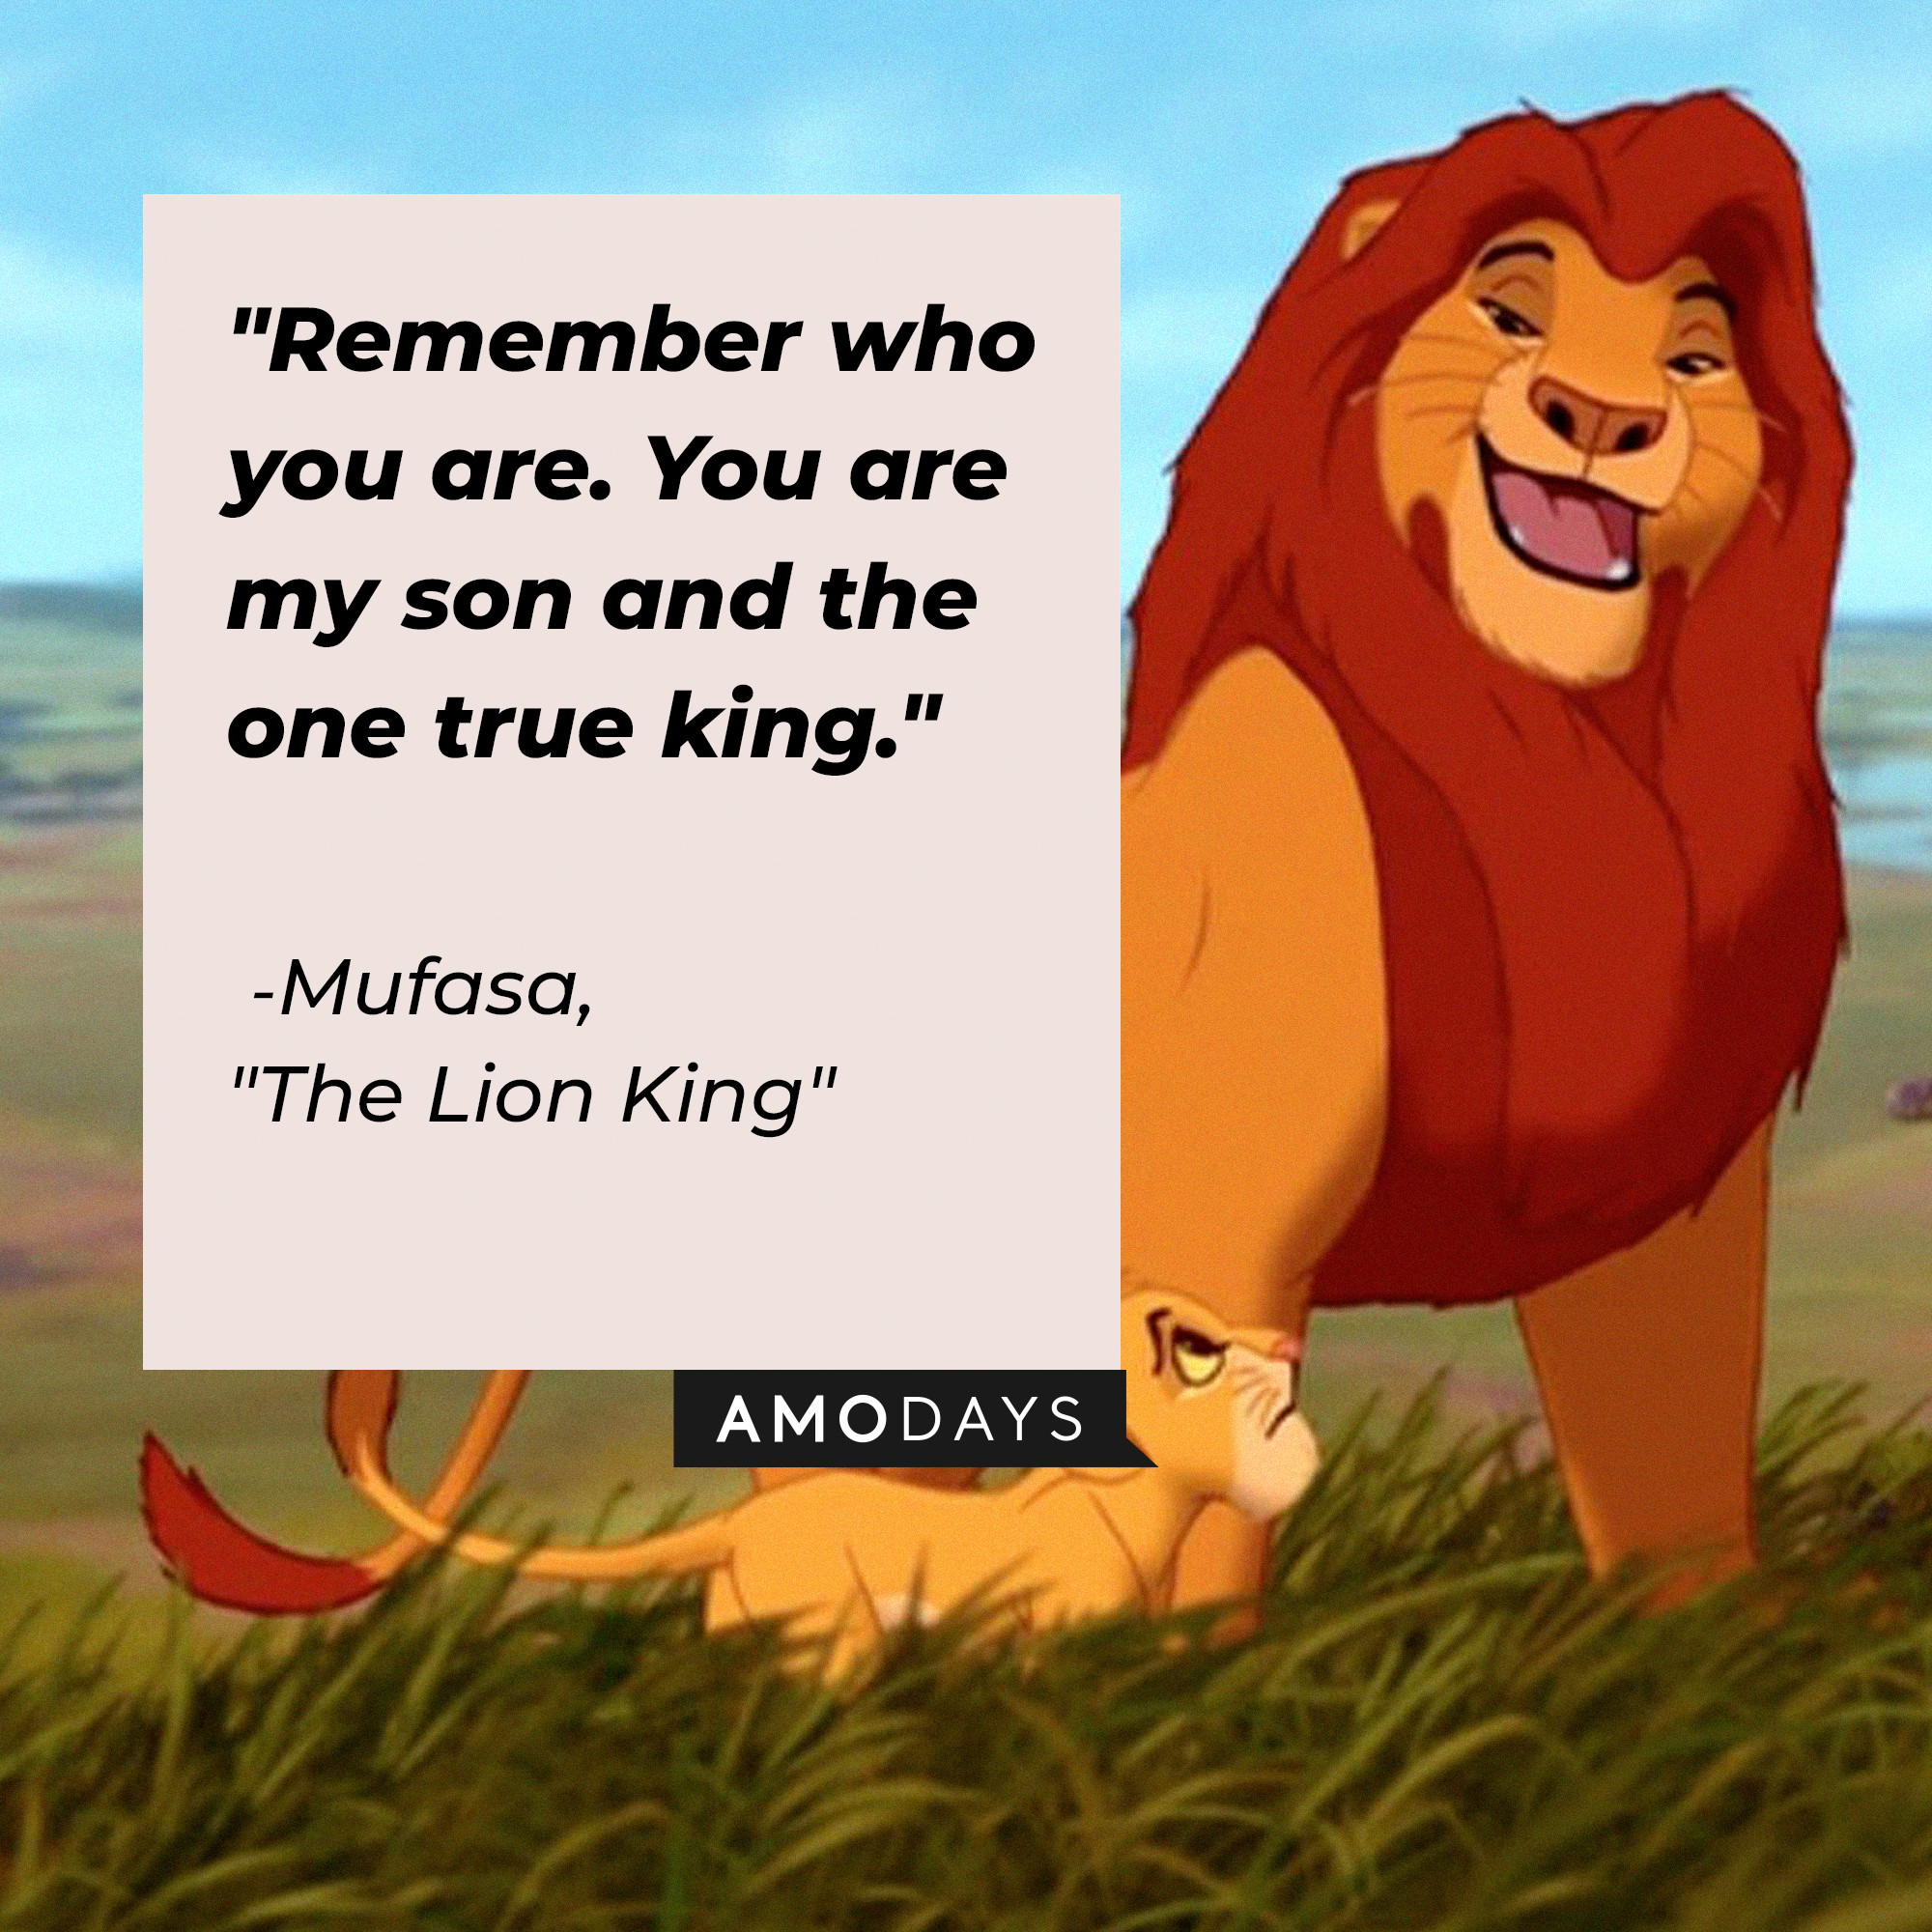 Mufasa with his quote: "Remember who you are. You are my son and the one true king." | Source: Facebook.com/DisneyTheLionKing